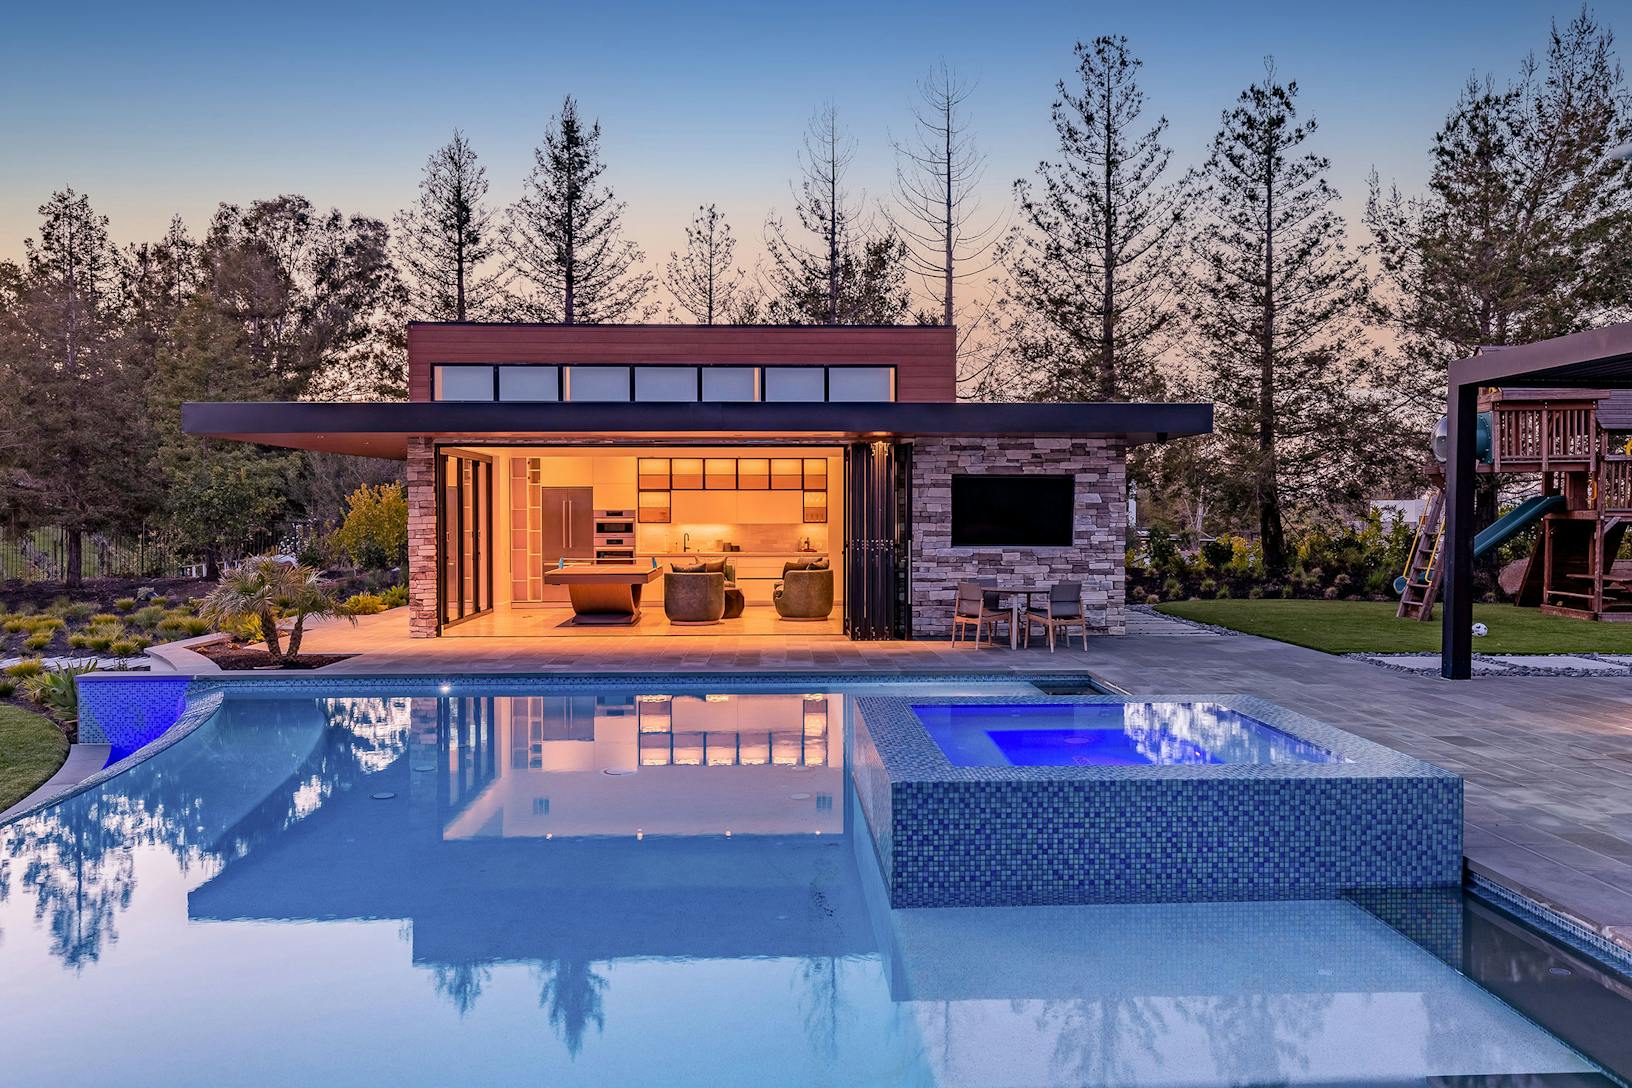 A modern pool house with bifold glass walls and a patio